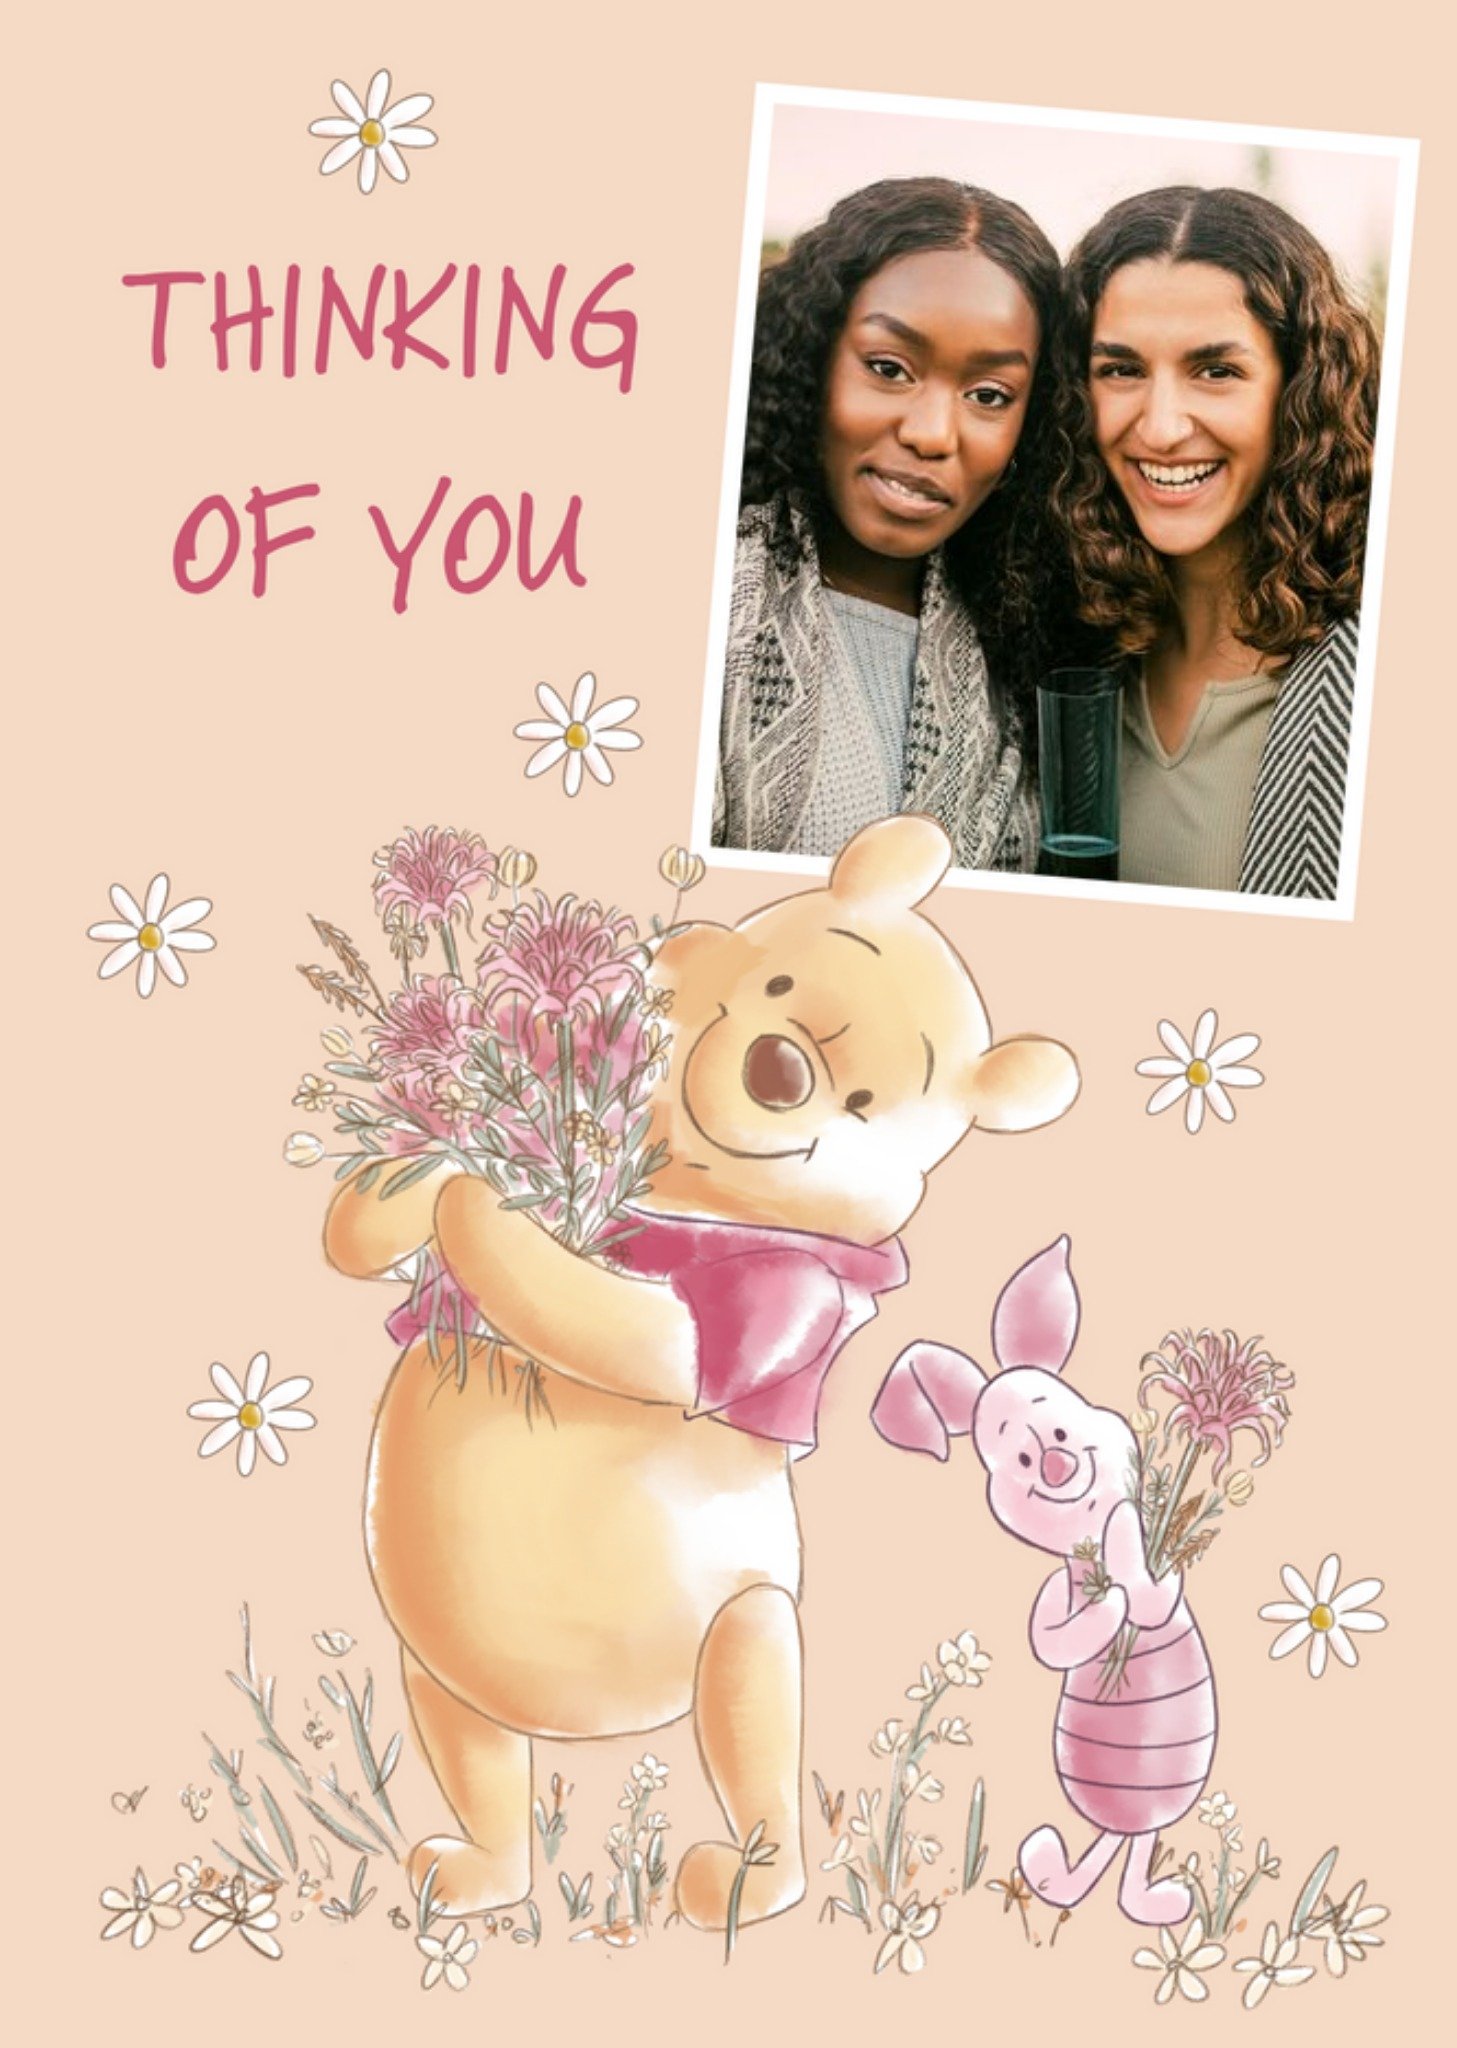 Winnie The Pooh And Piglet Illustration Thinking Of You Photo Upload Card Ecard